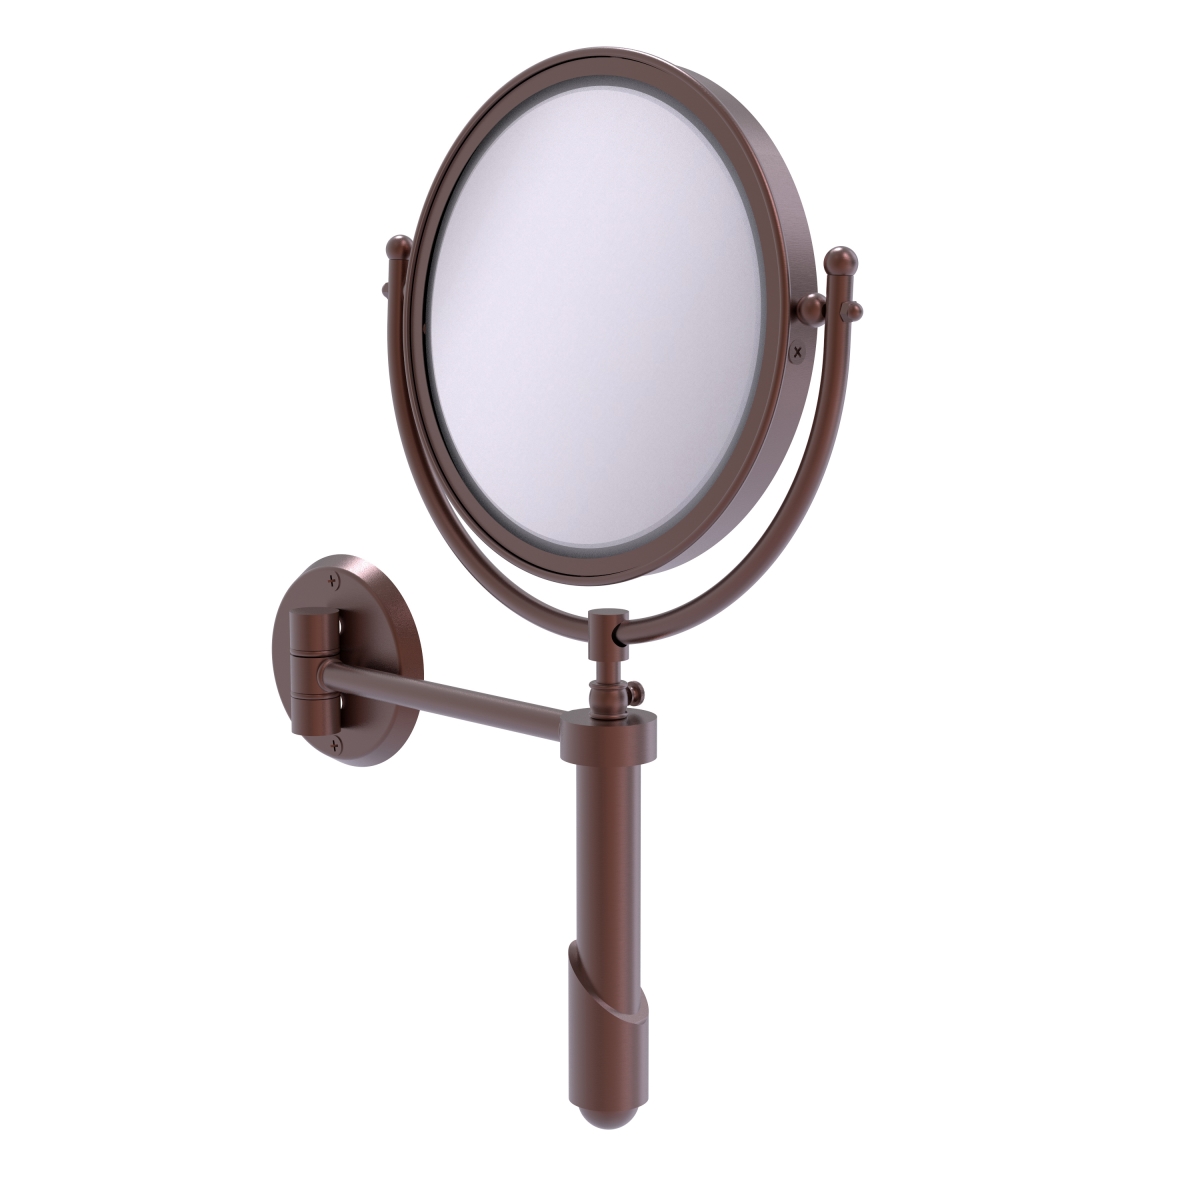 SHM-8-4X-CA 8 in. dia. Soho Collection Wall Mounted Make-Up Mirror with 4X Magnification, Antique Copper -  Allied Brass, SHM-8/4X-CA